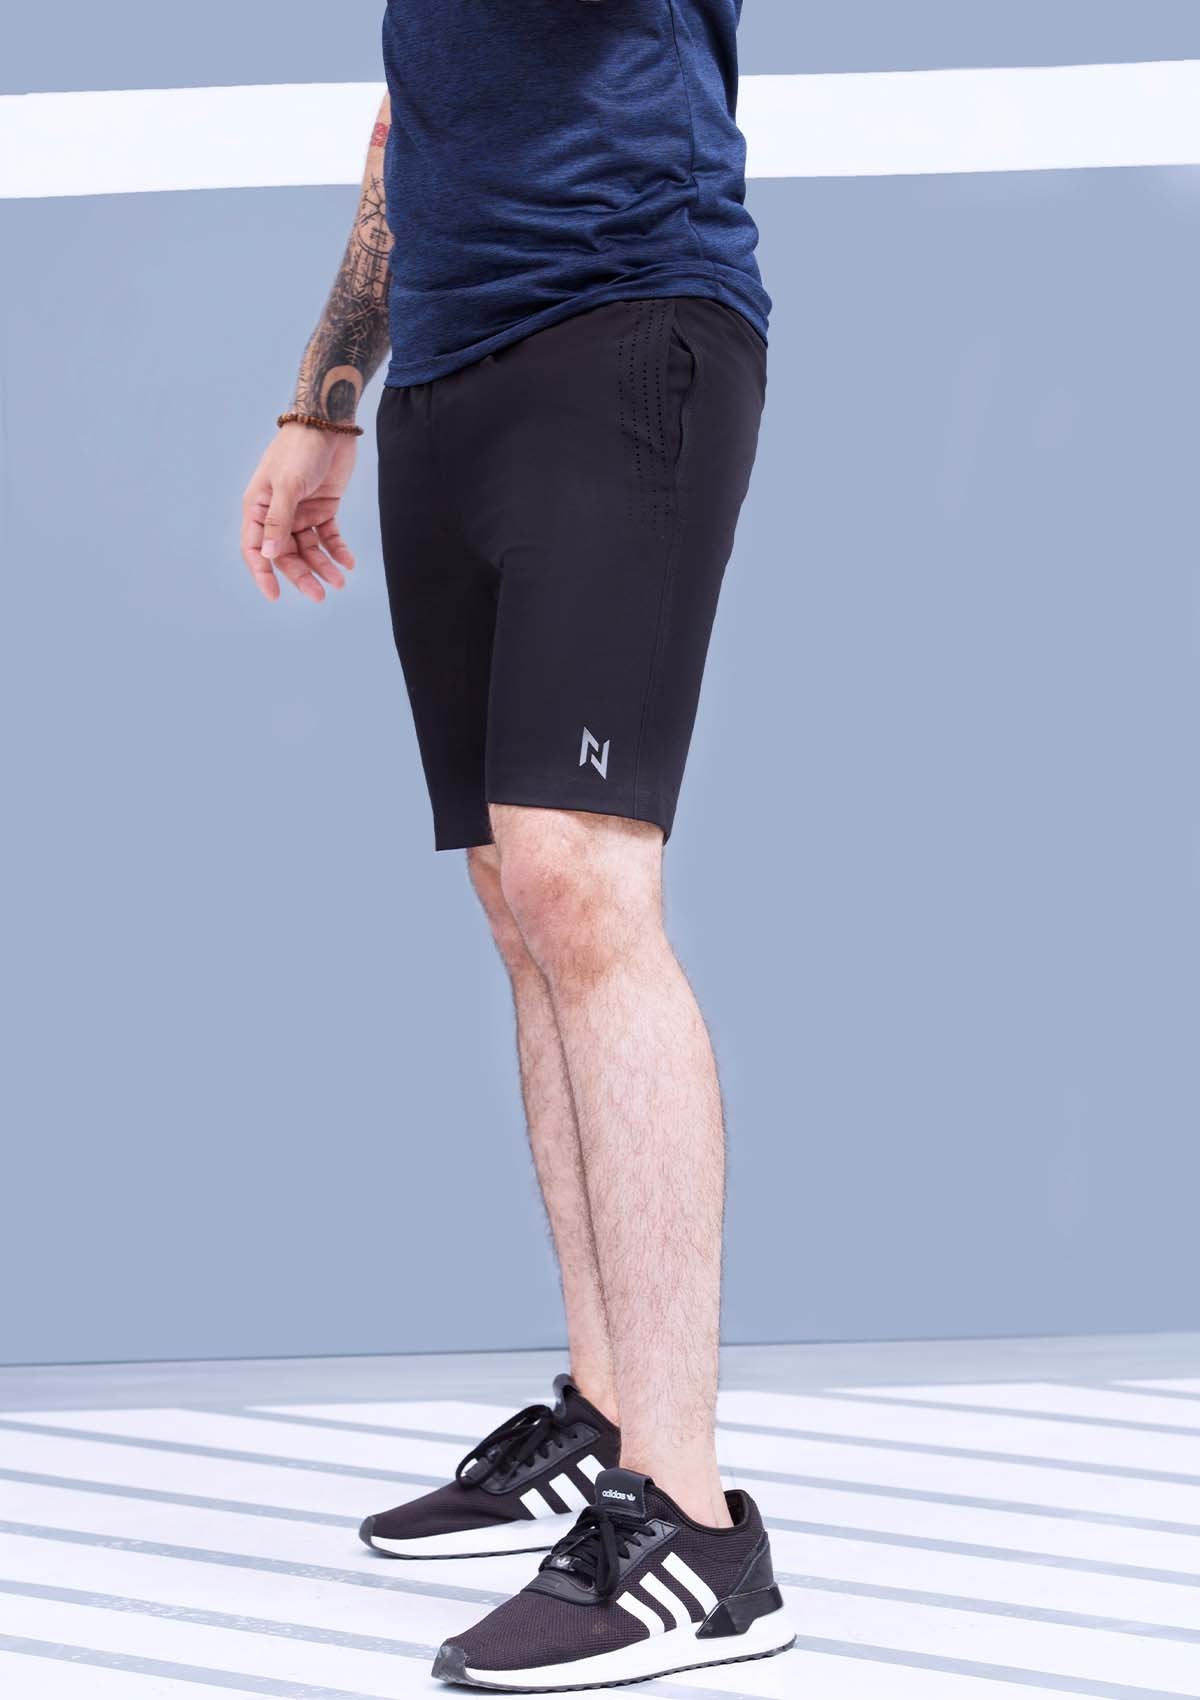 PERFORATED TRAINING SHORTS WOVEN - BLACK - Nomad Apparel